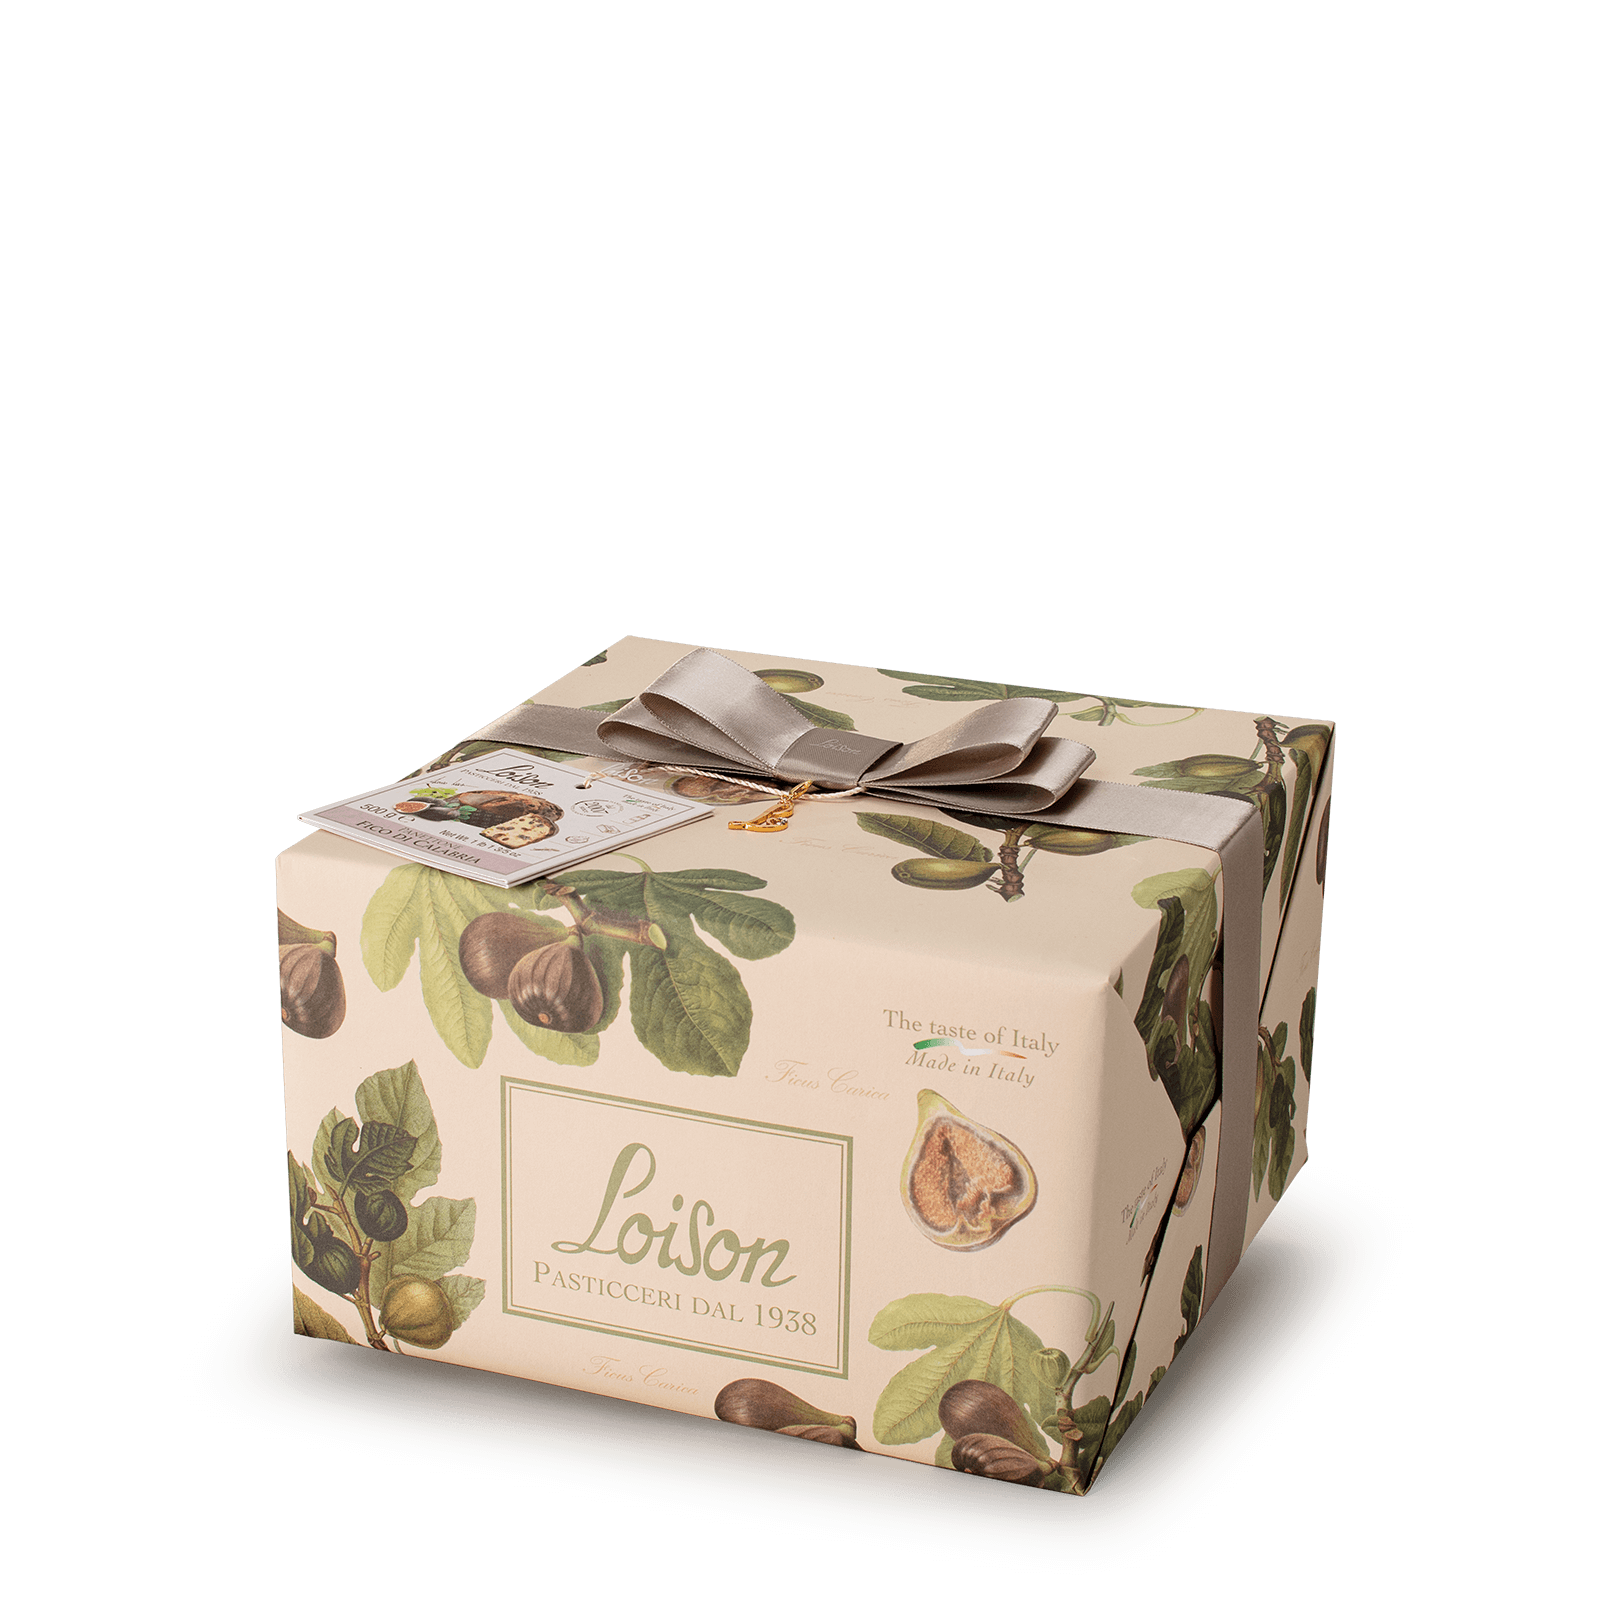 Figs Panettone - Fruit and Flowers Loison